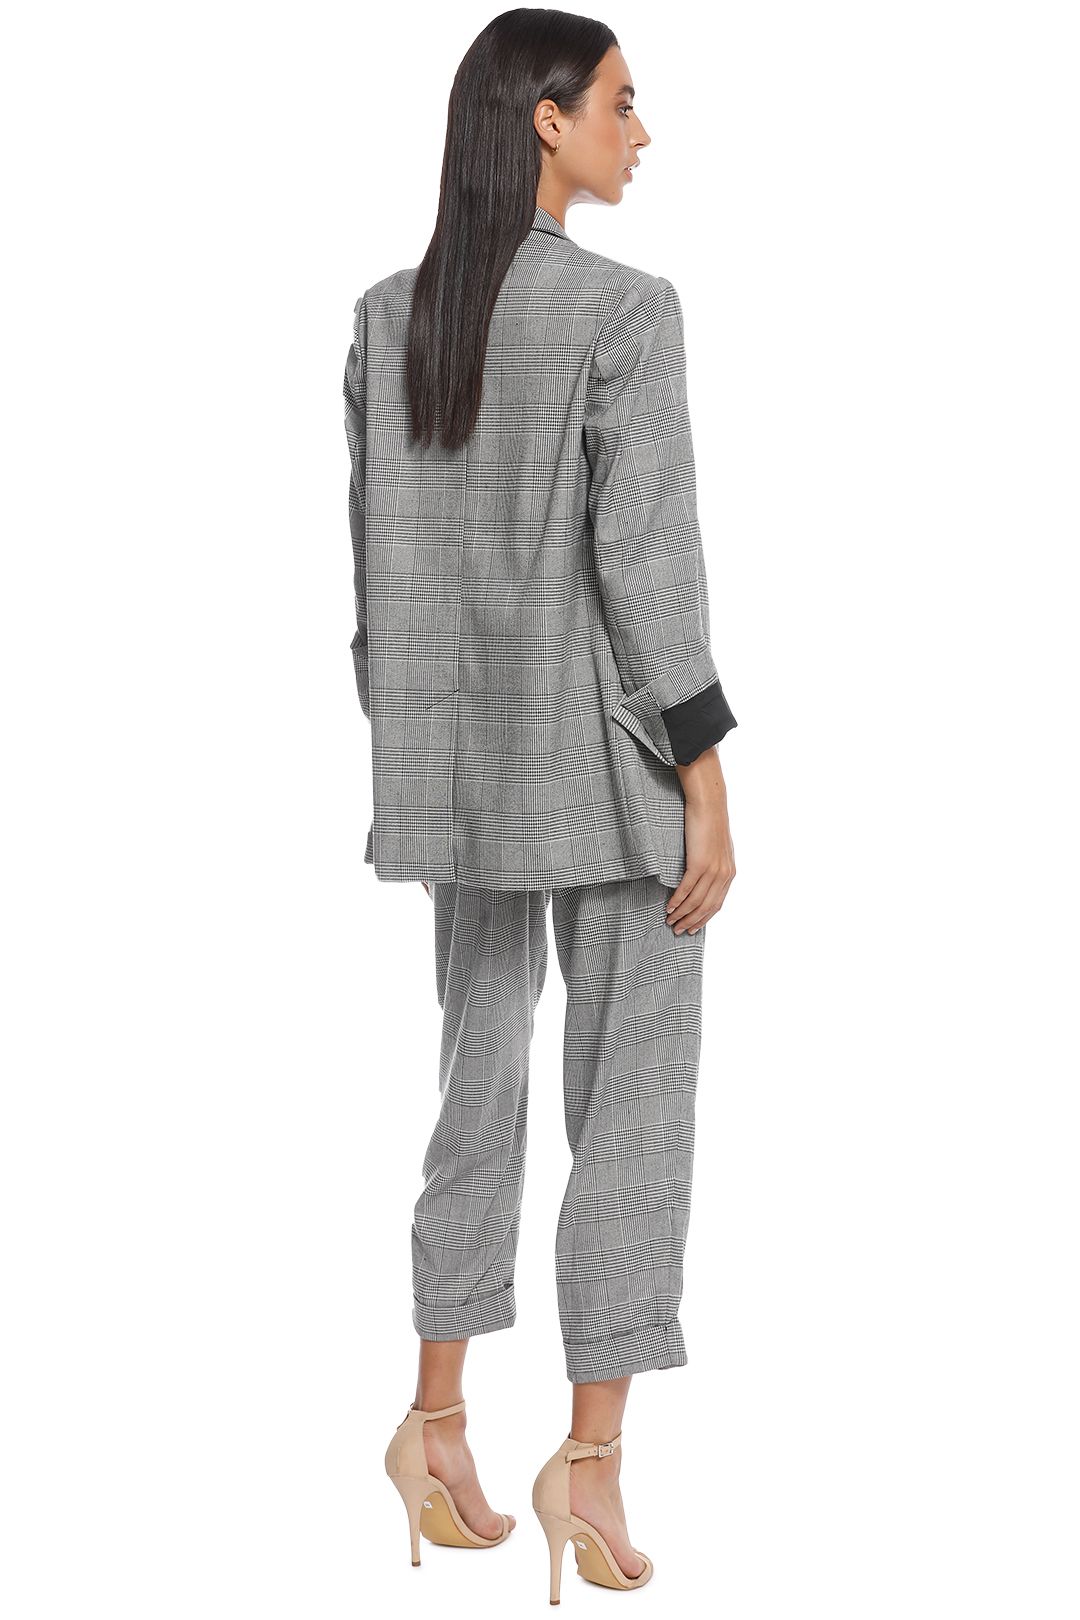 Nicholas the Label - Check Suiting Trouser - Back